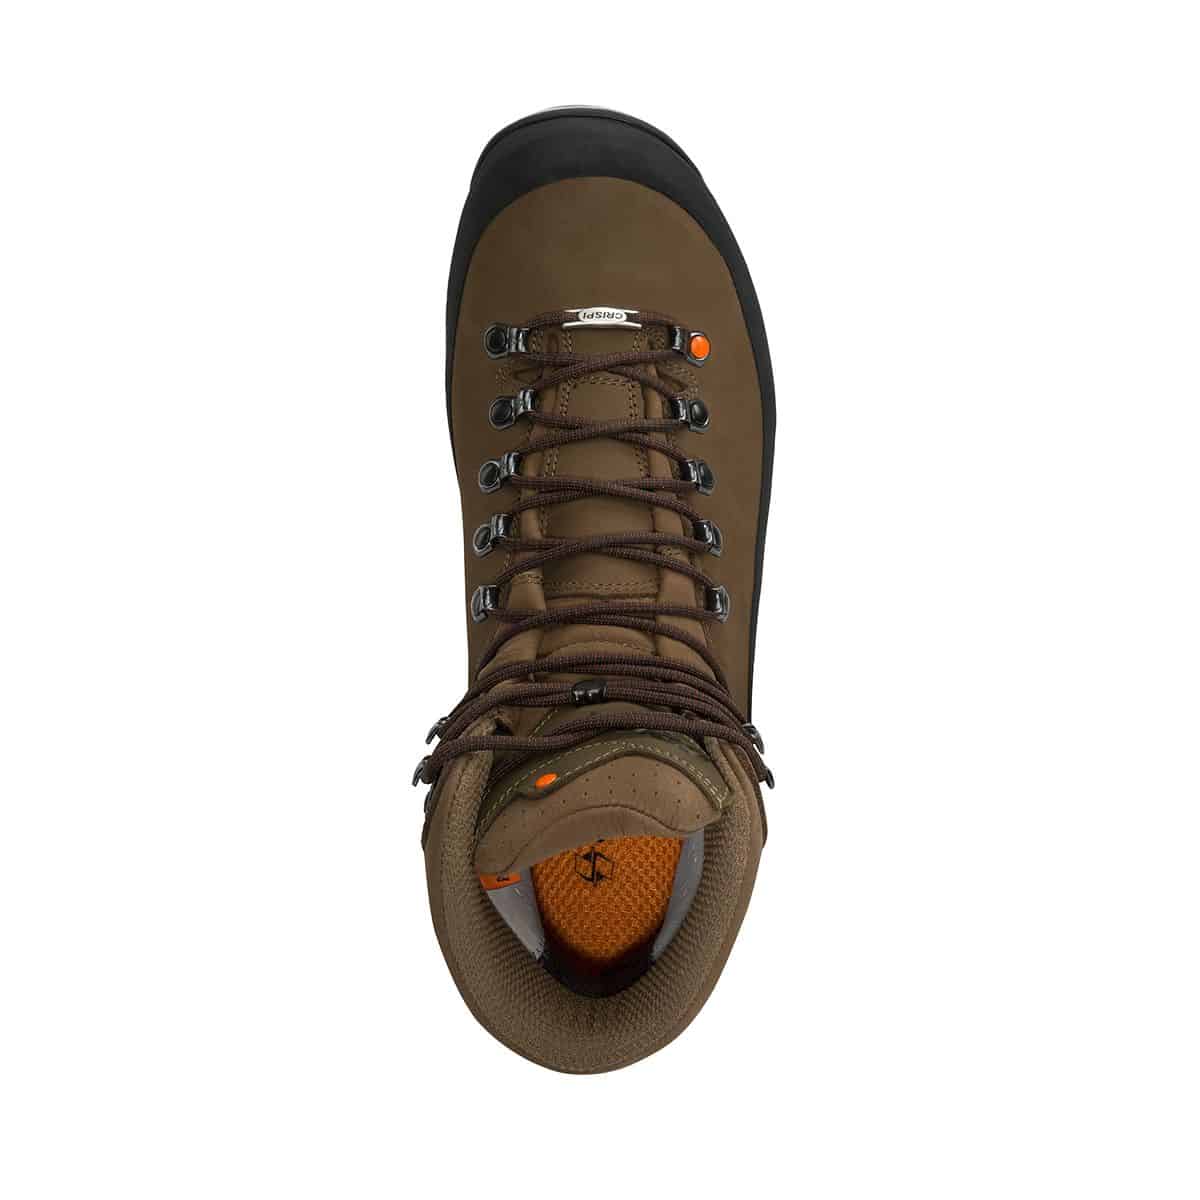 Crispi Nevada Boots - Non Insulated Hunting Boot Top